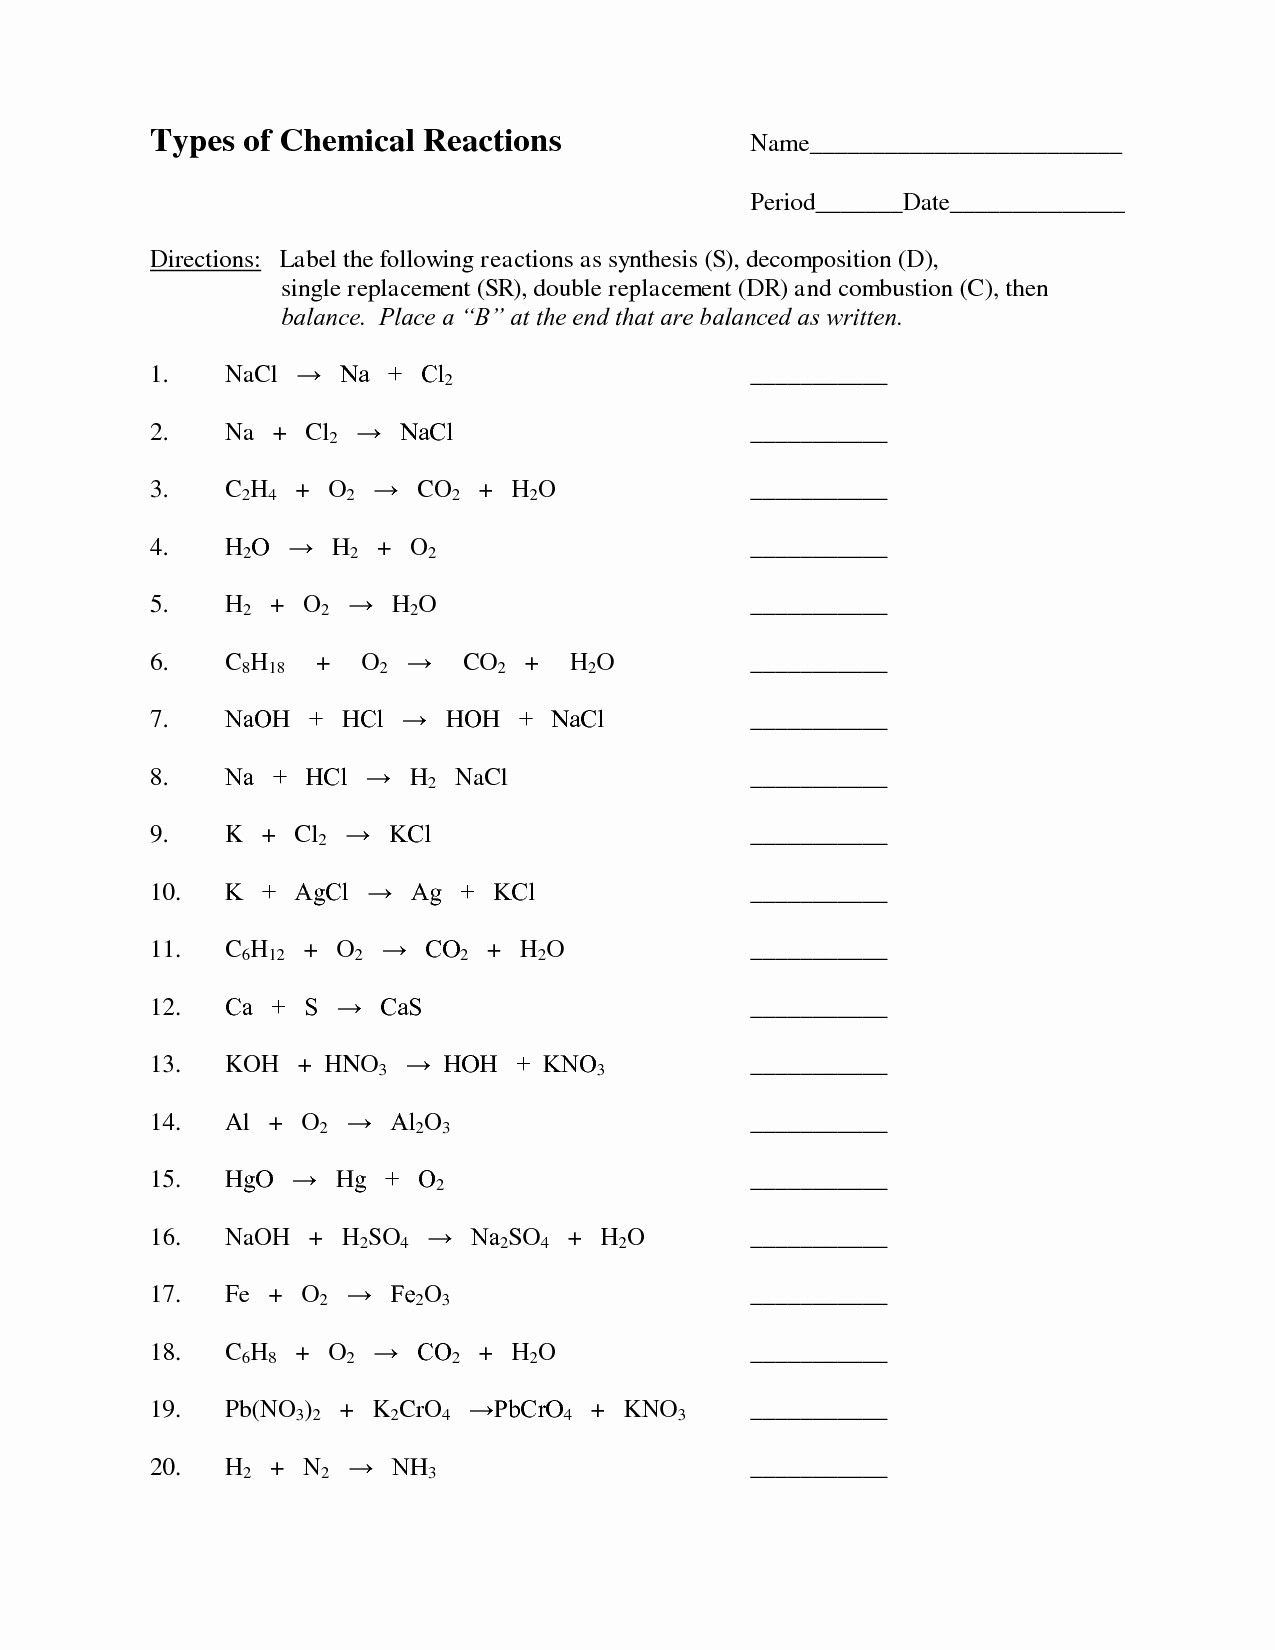 Chemical Reactions Worksheet Answers Inspirational 15 Best Of Types Reactions Worksheet Answer Key